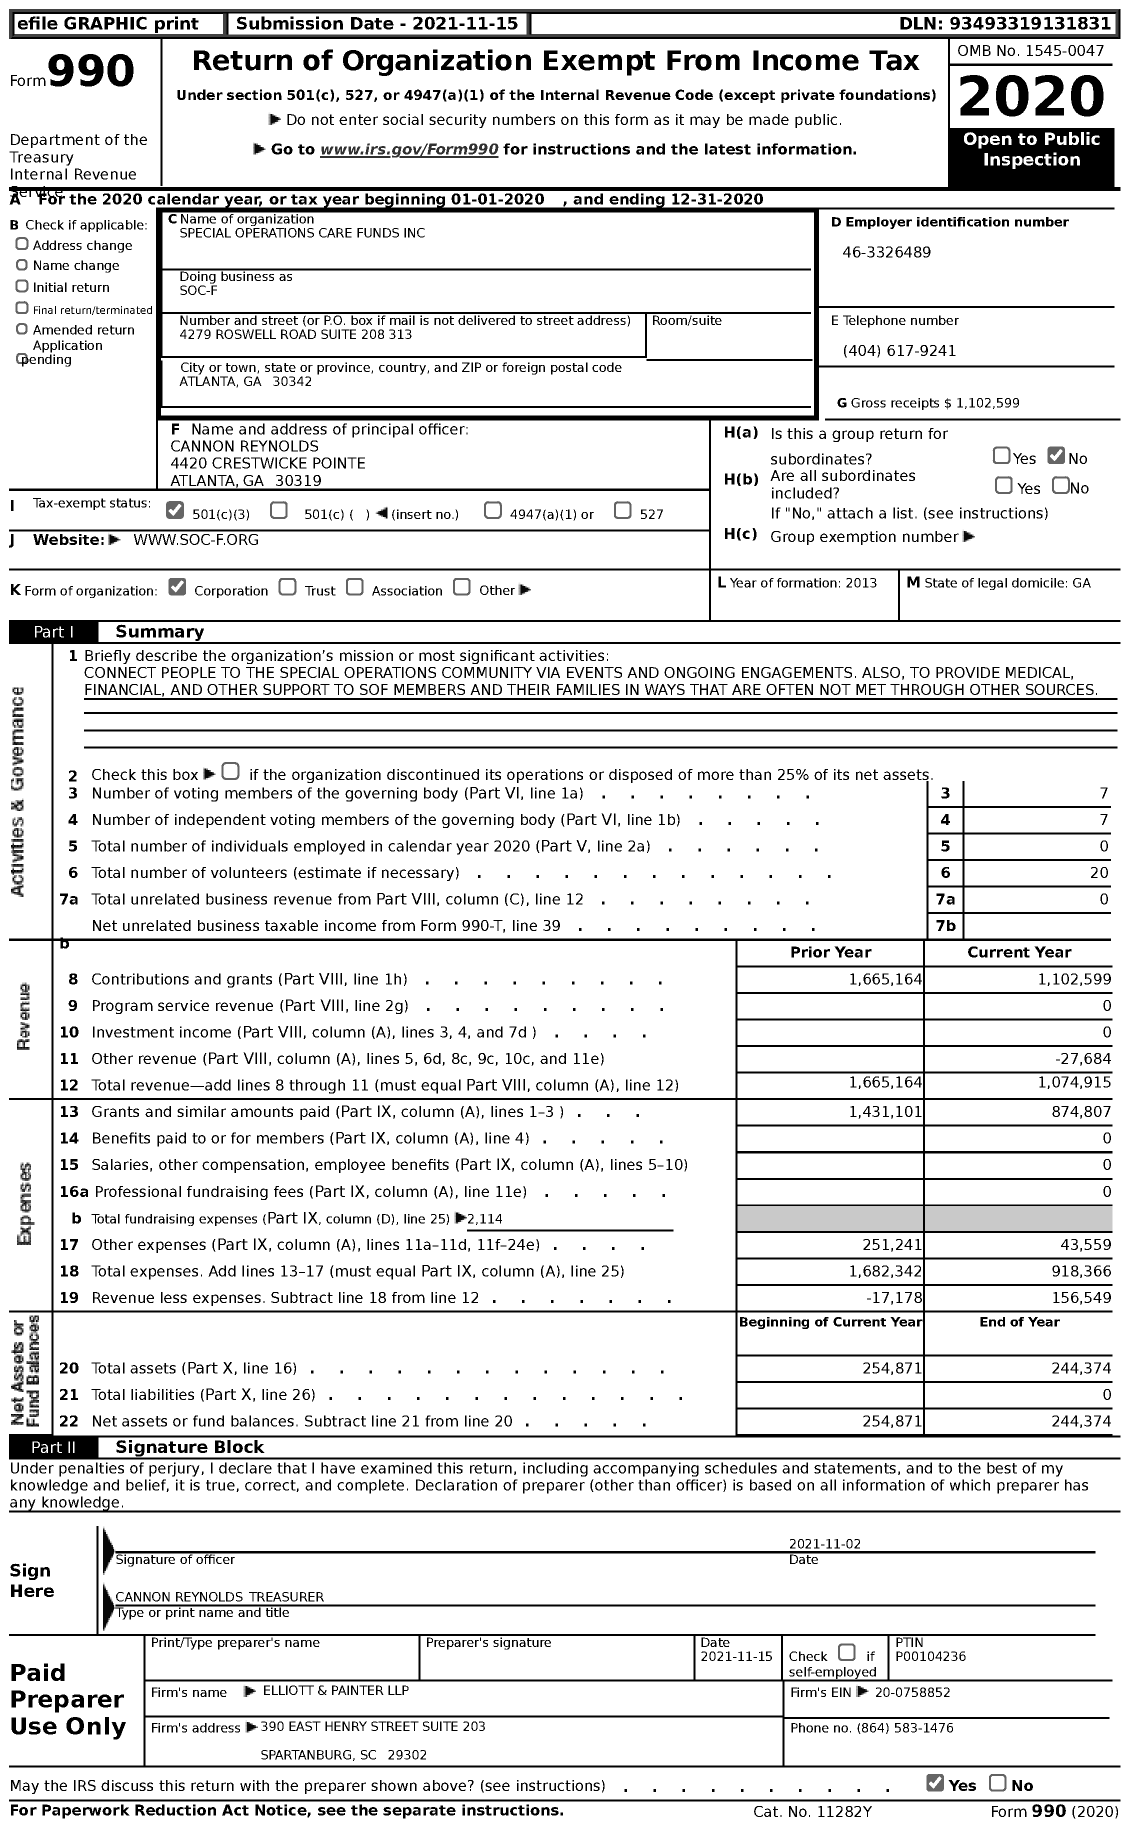 Image of first page of 2020 Form 990 for Special Operations Care Fund (SOC-F)